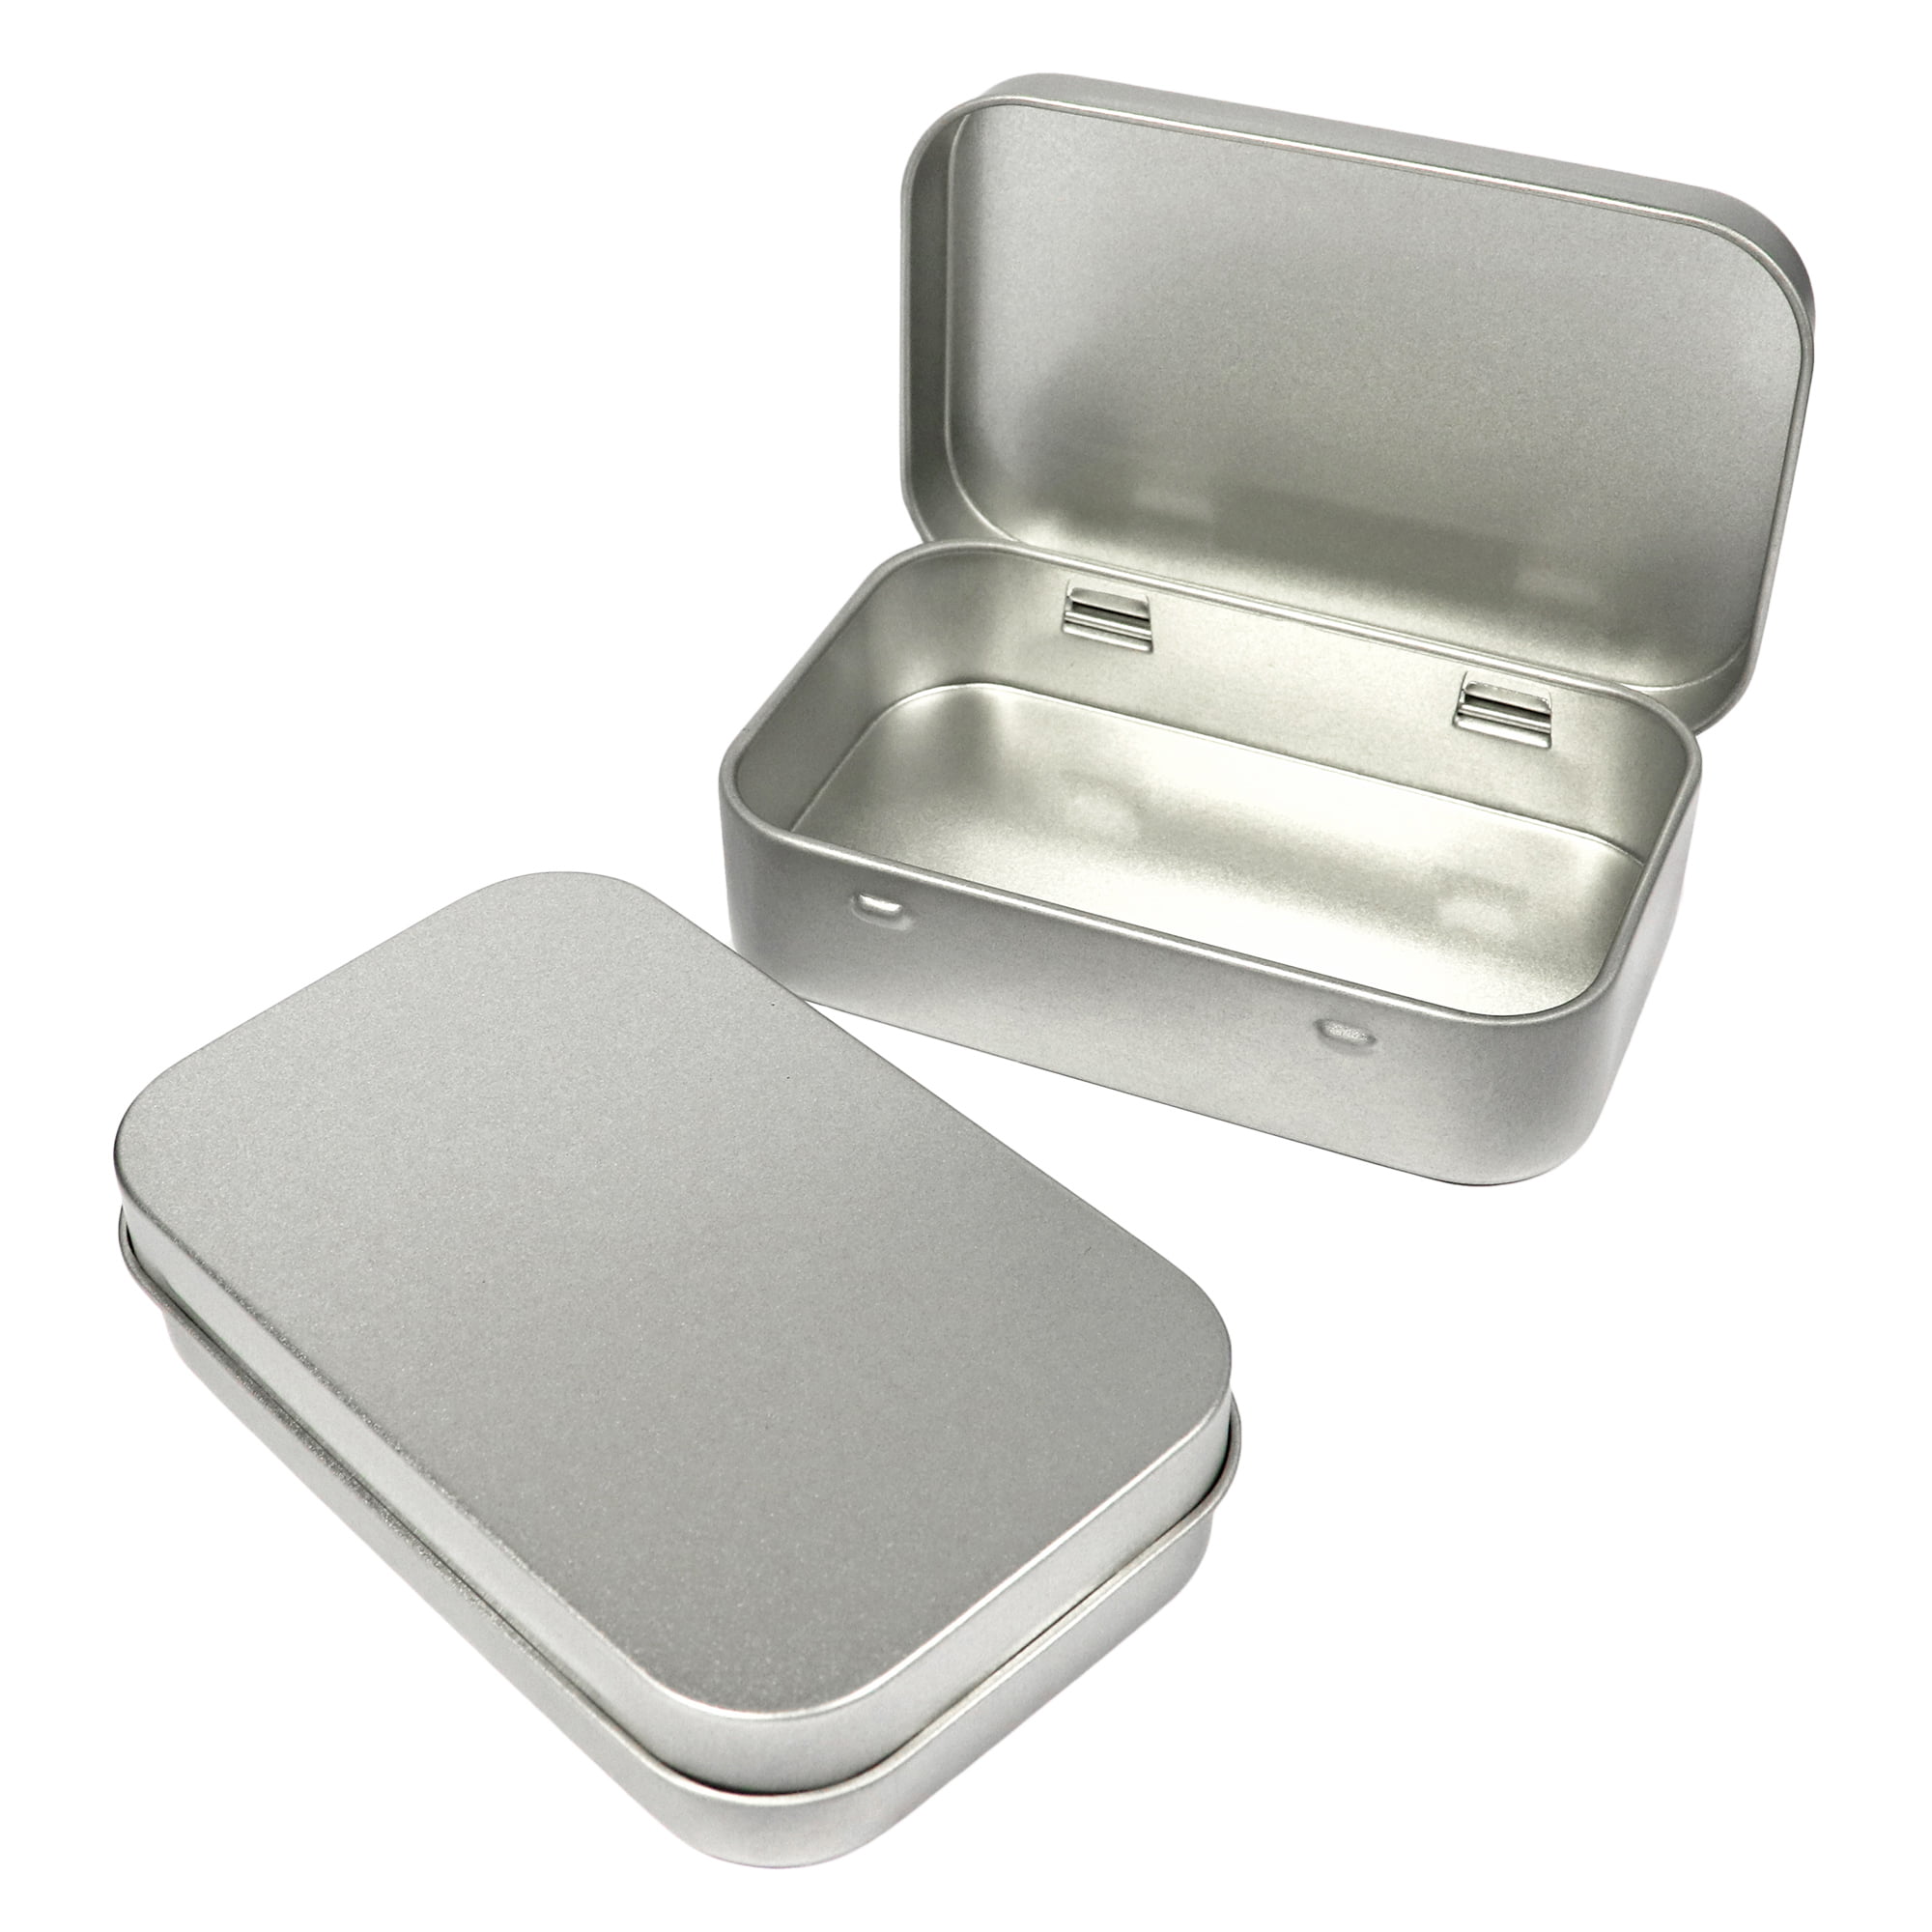 Silver Rectangular Empty Tin Box Containers Banatree Metal Tin Box Metal Rectangular Empty Hinged Tins Box Containers Mini Portable Box Small Storage Kit Home Organizer Holders 